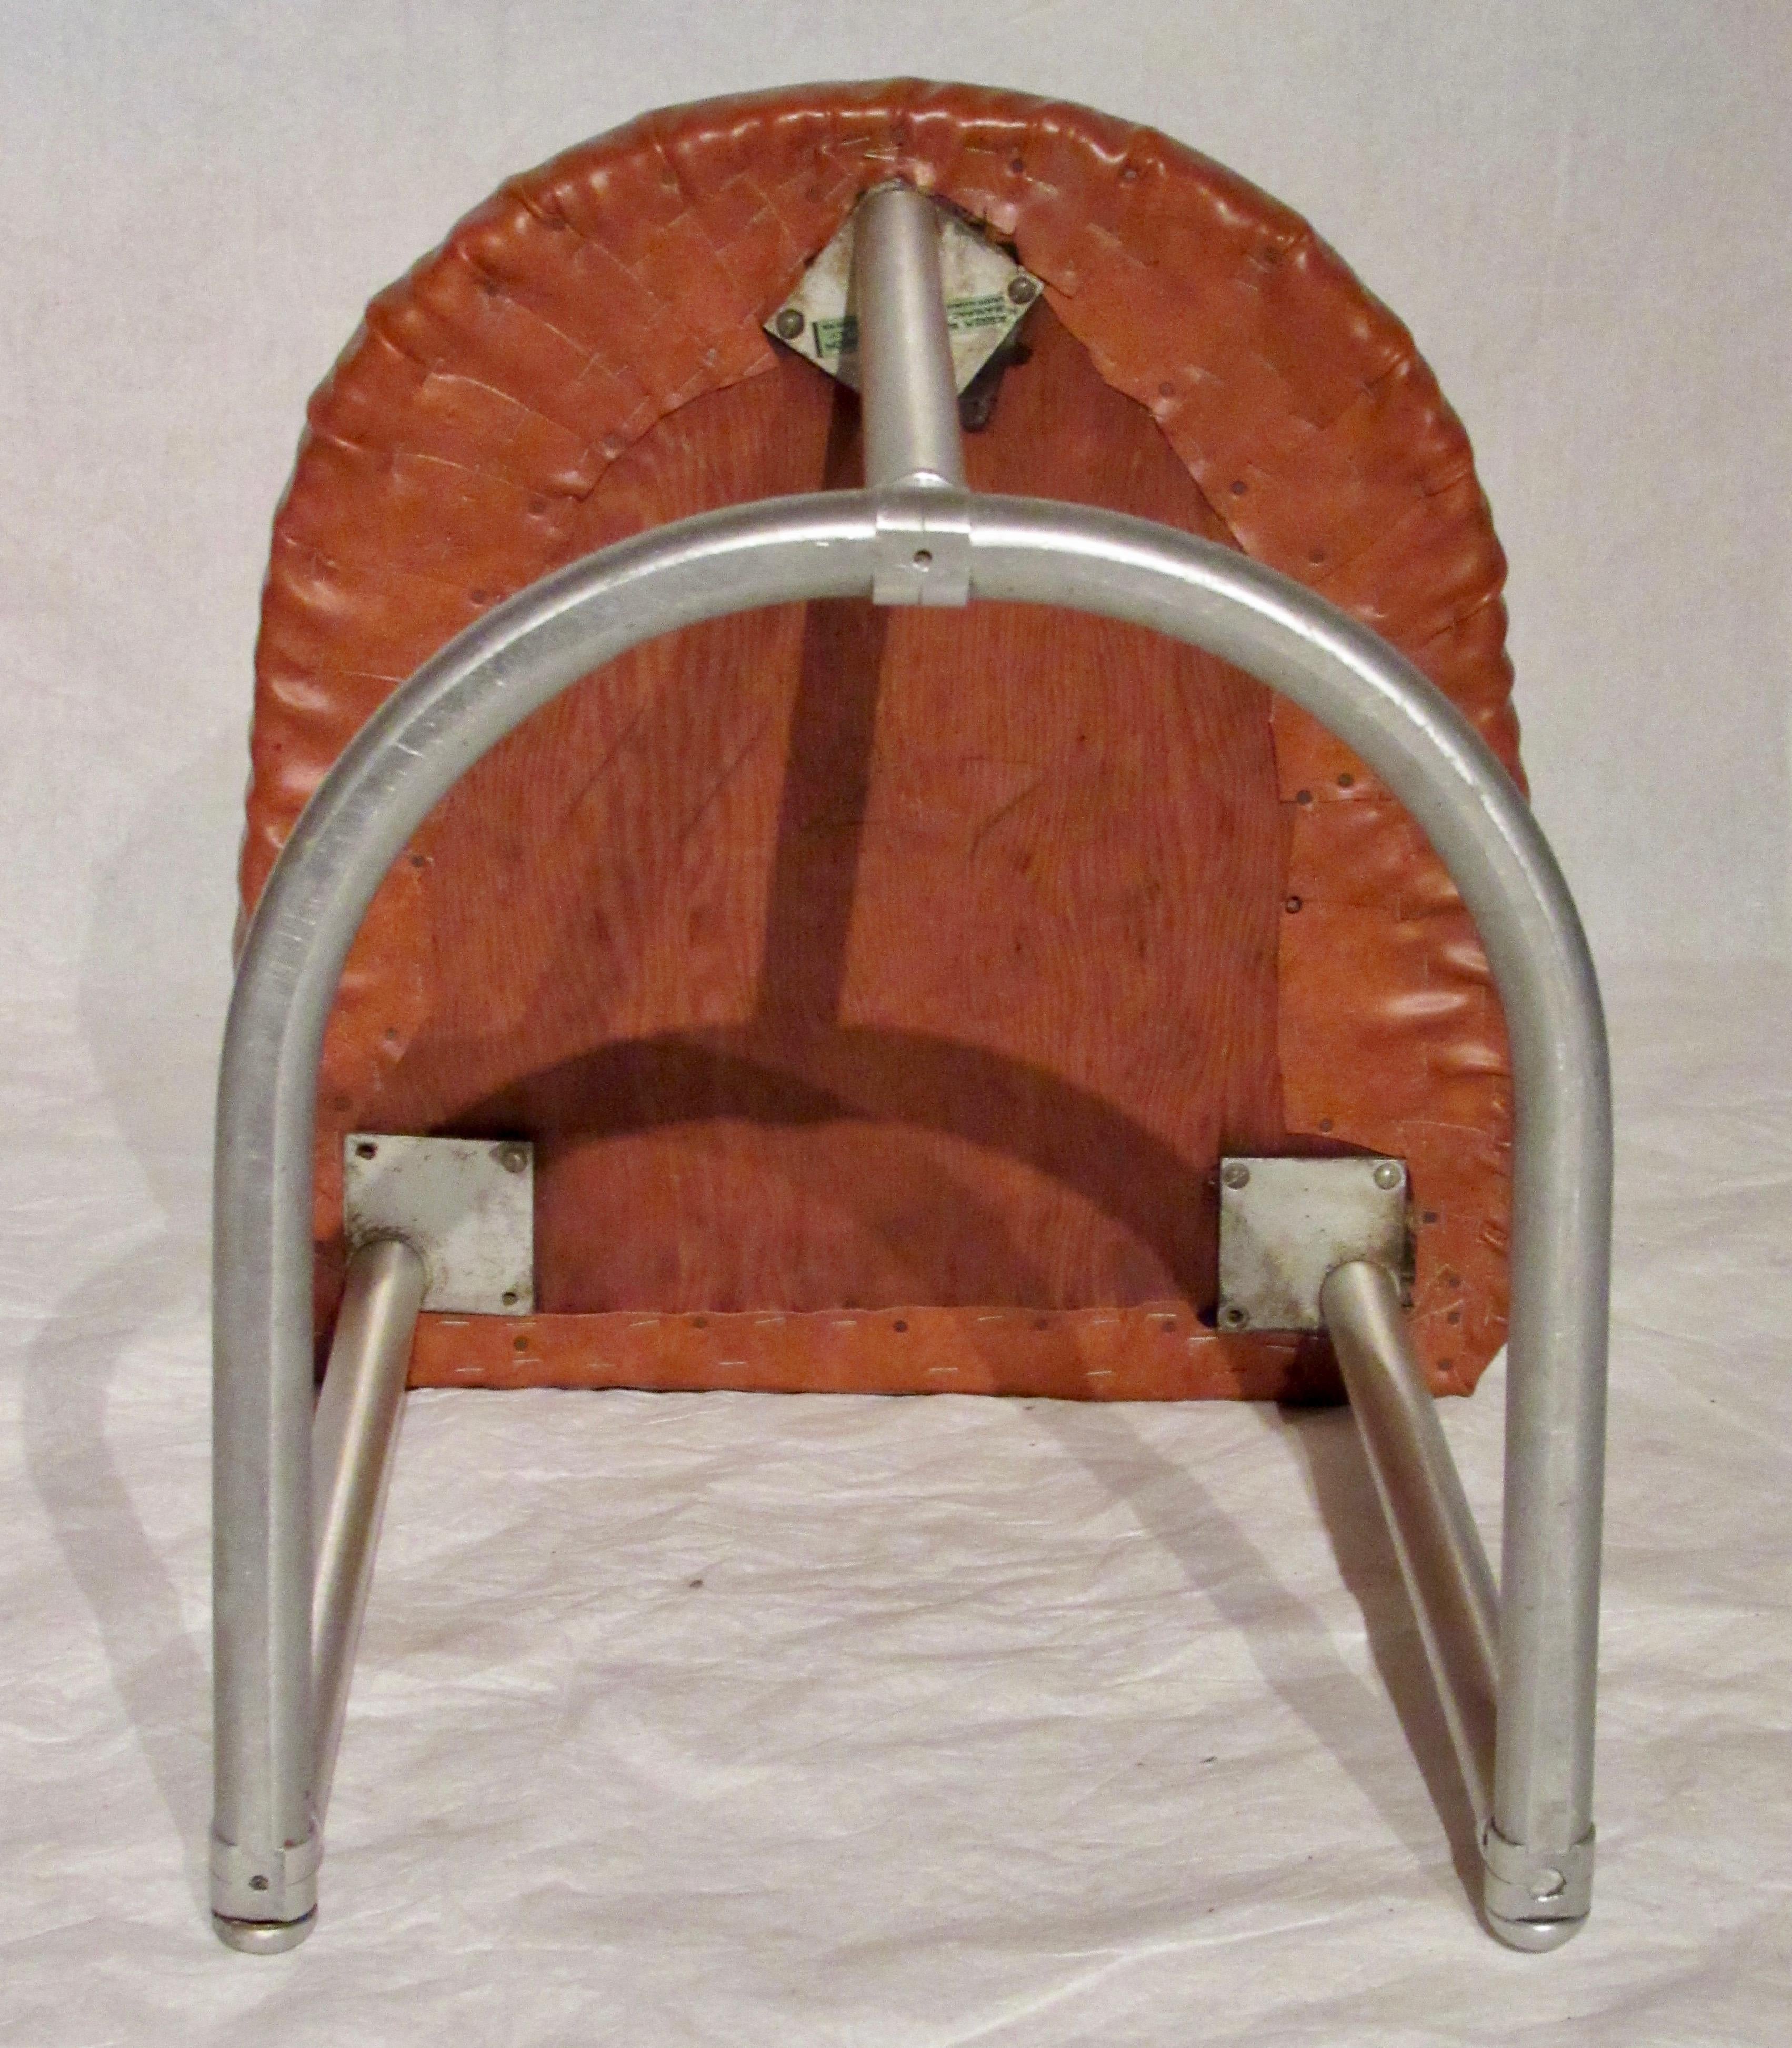 Anodized Warren McArthur Vanity Stool Style No. 1131, circa 1936 For Sale